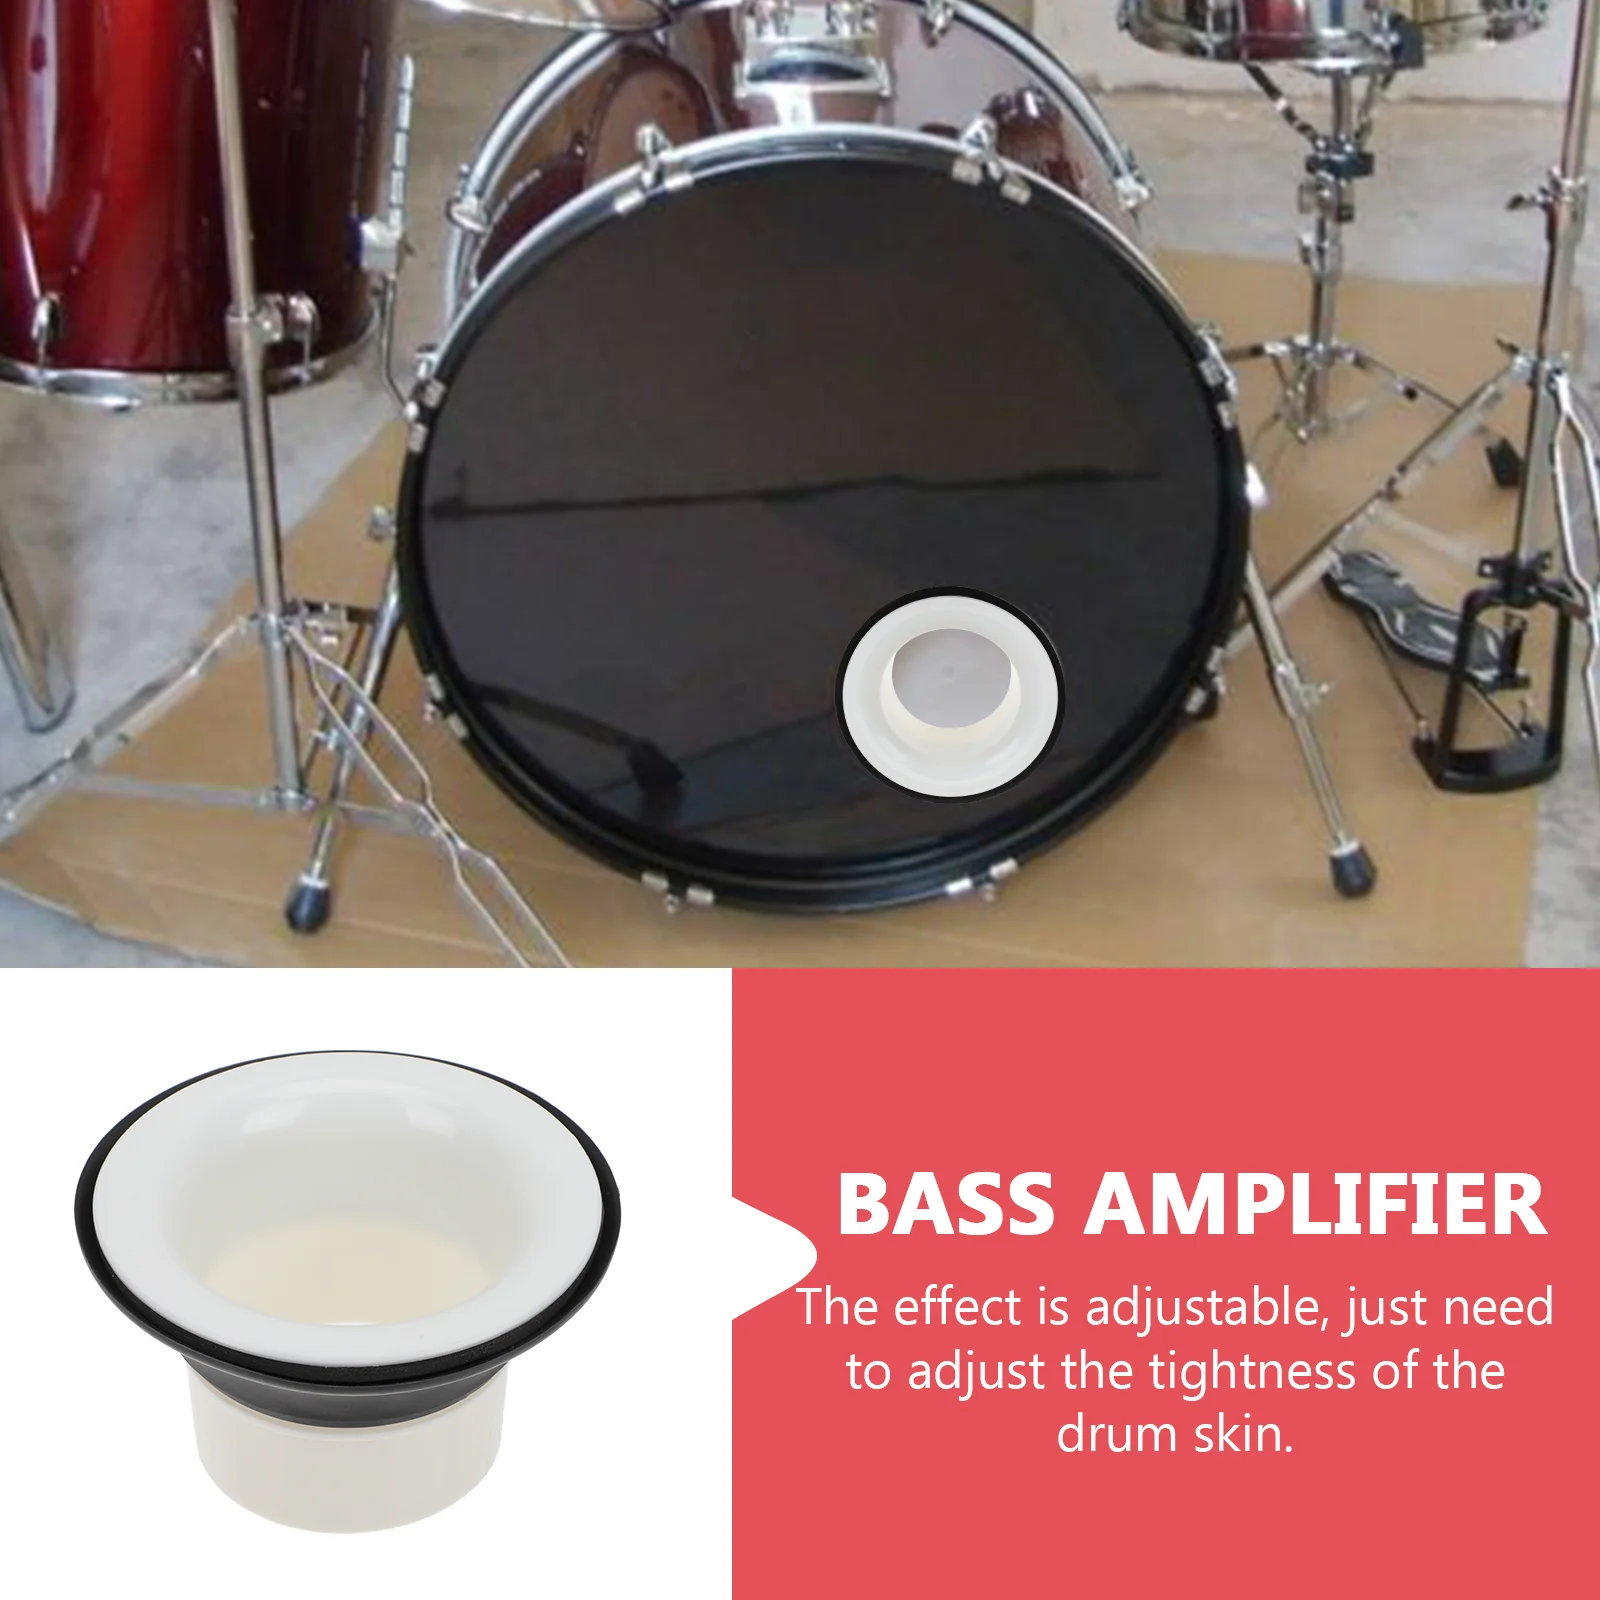 Drum Amplifier Woofer Bass Hole Drumheads Pillow Protector Professional Booster Kit Accessories enlarge